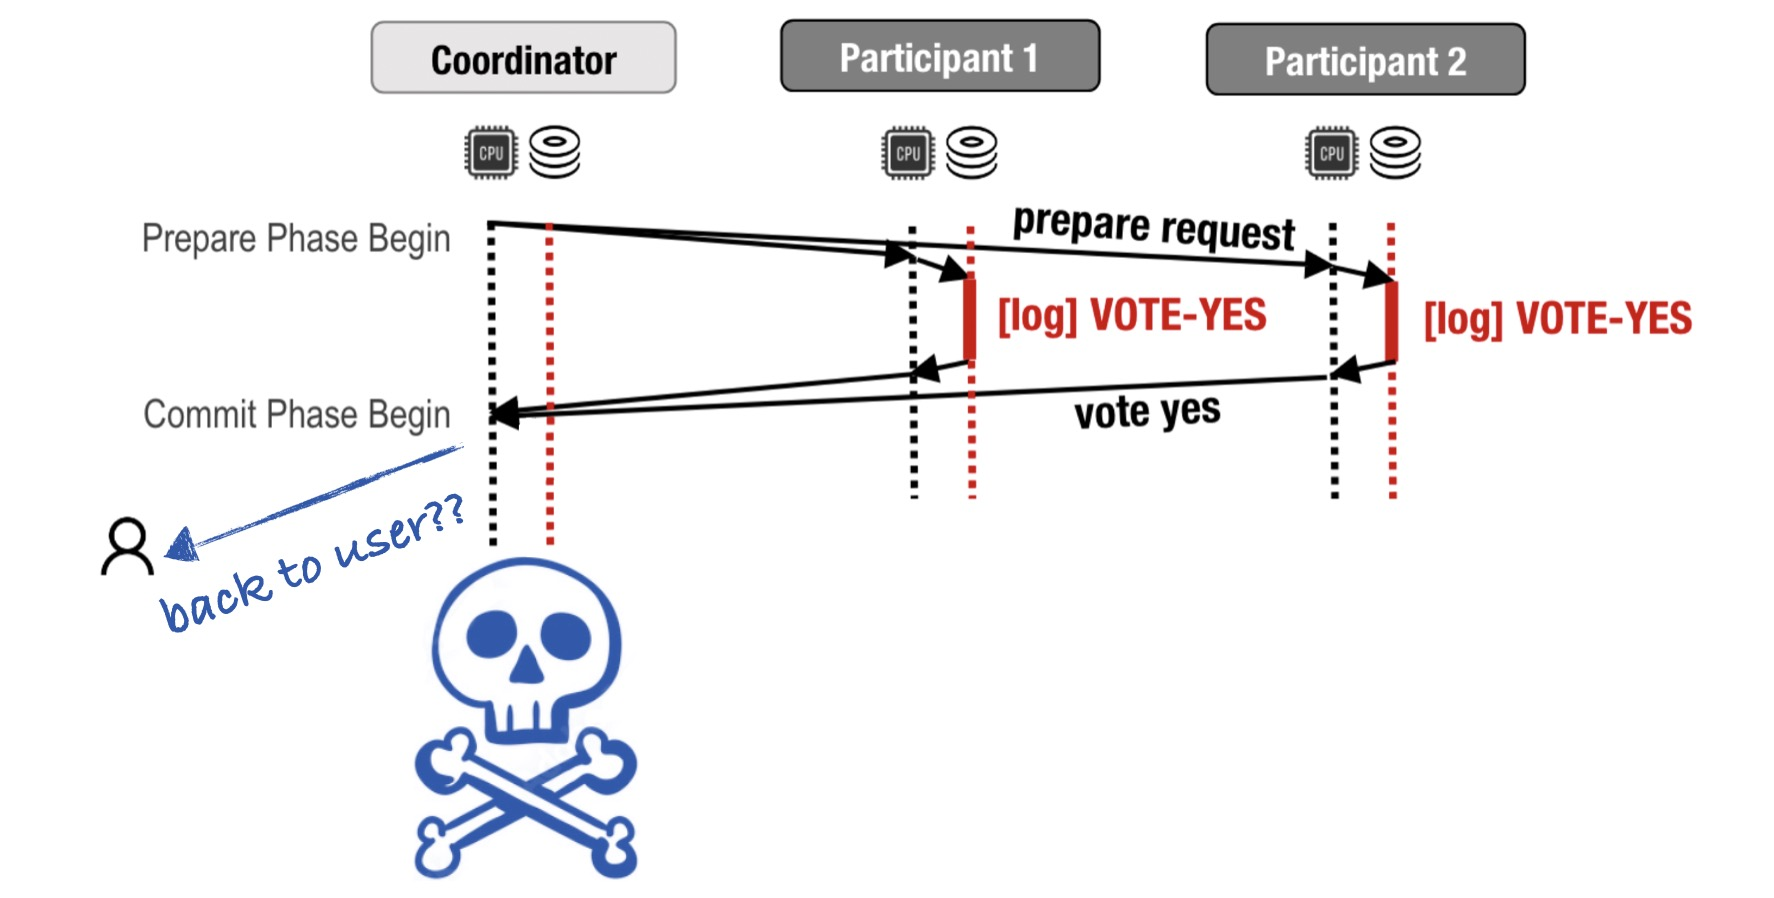 Diagram showing the coordinator not logging its decision, but replying to the user then dying.